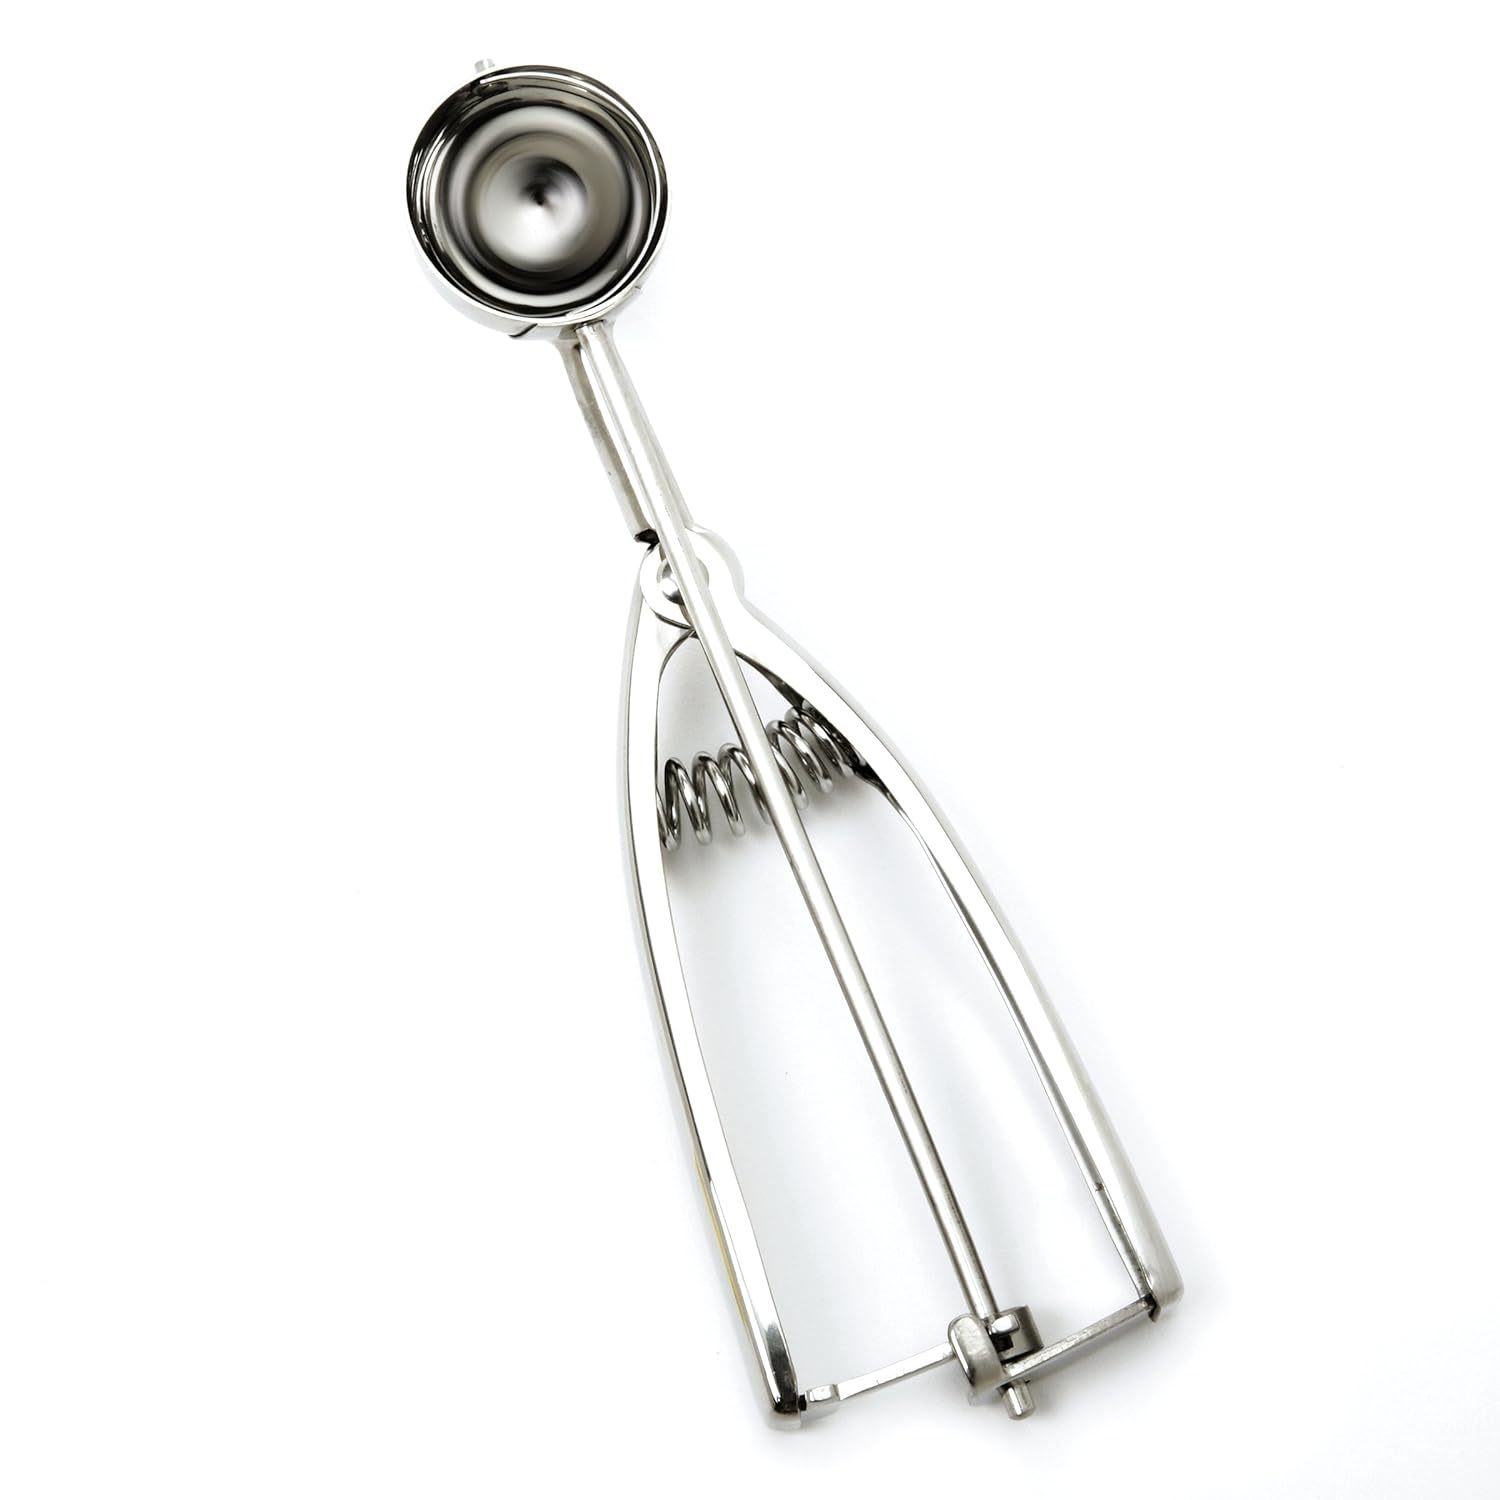 Primary image for Norpro Stainless Steel Scoop, 39MM (1.5 Tablespoon), Silver